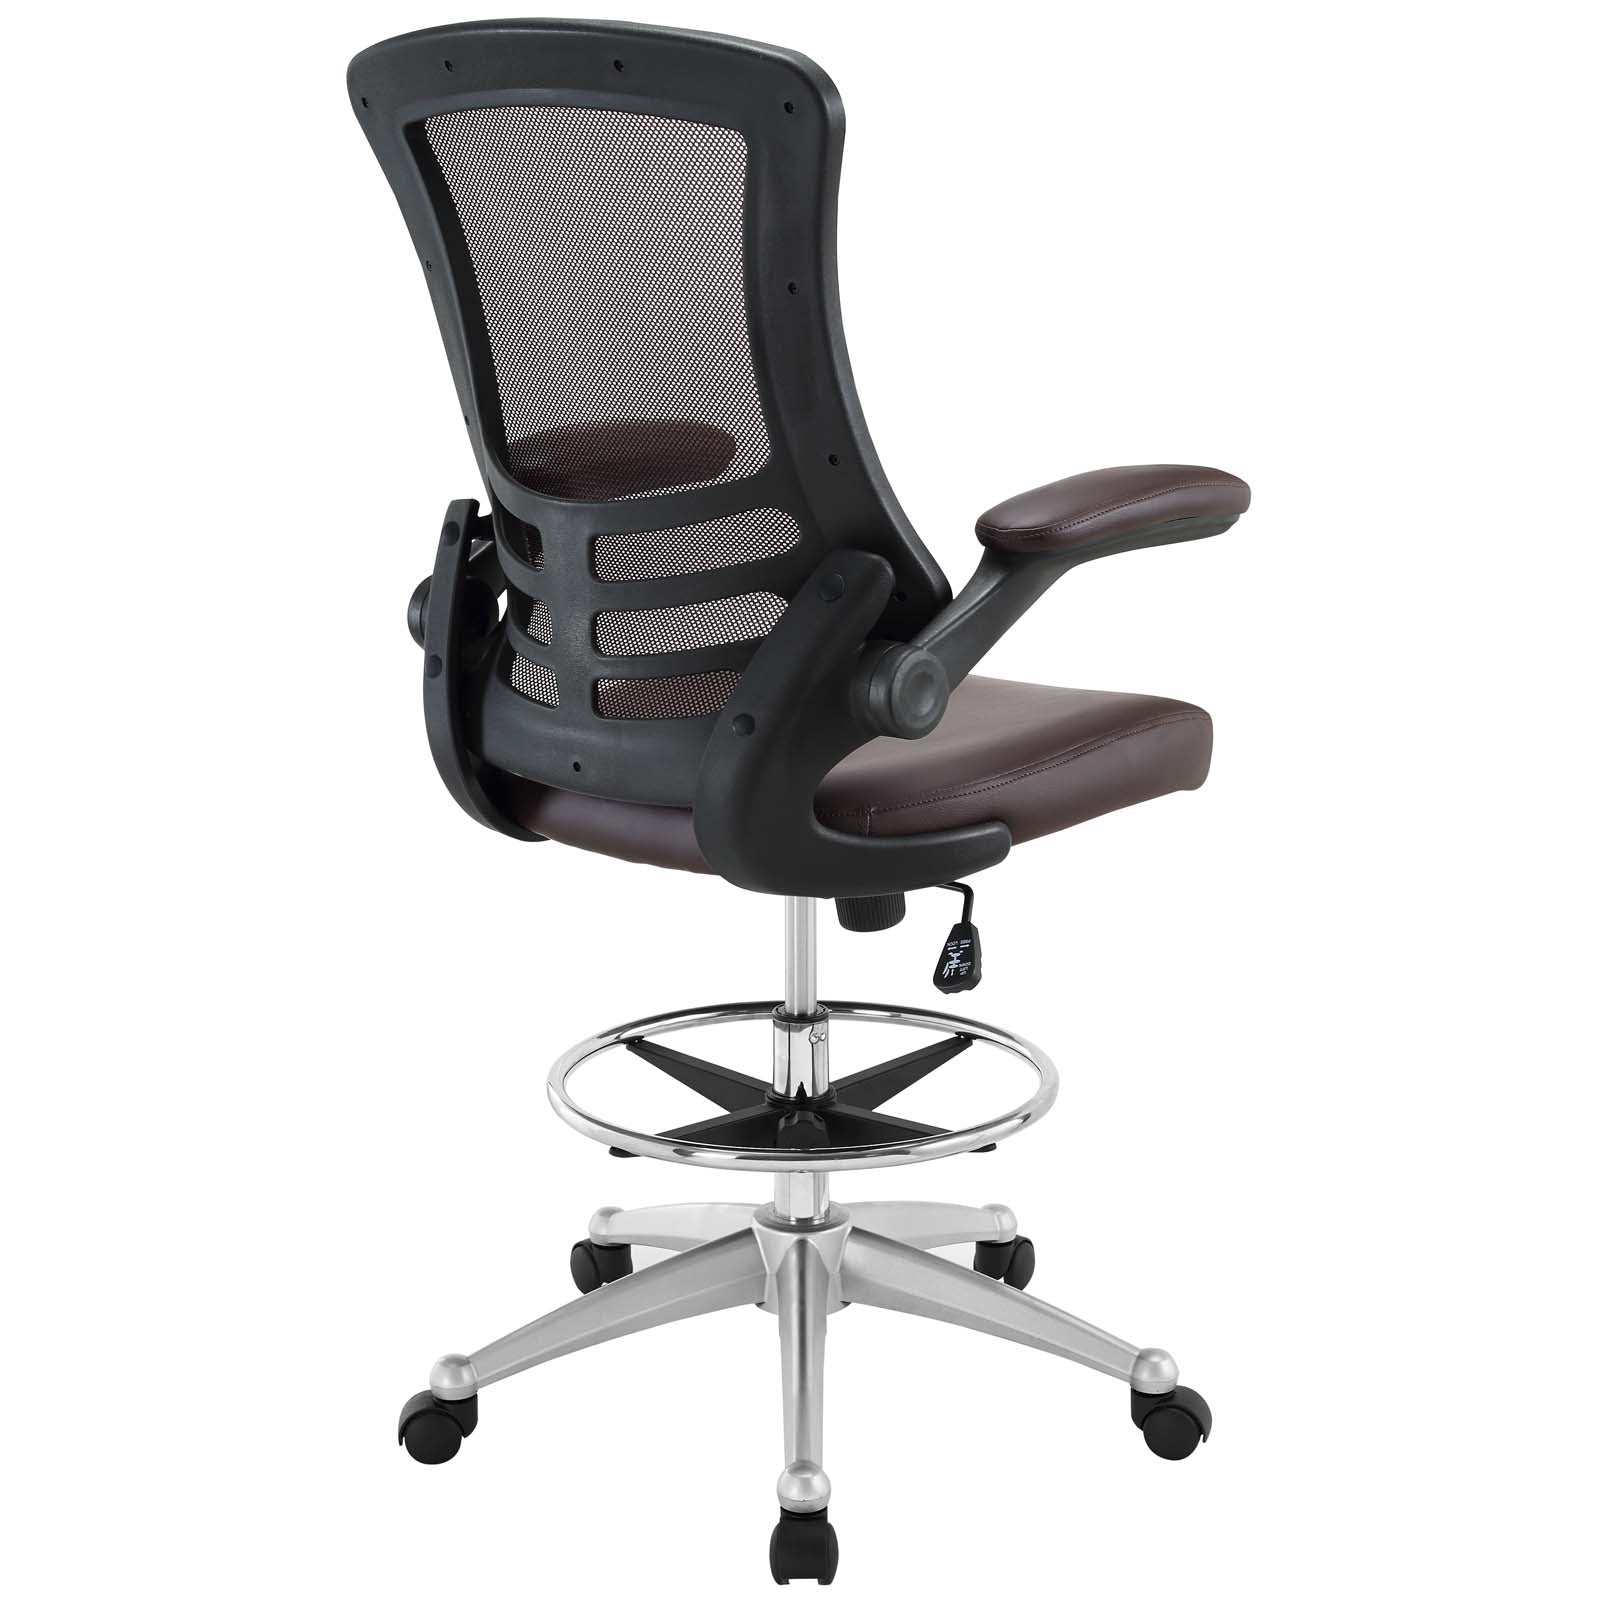 Office furniture: Vinyl Drafting Chair for beautiful Offices